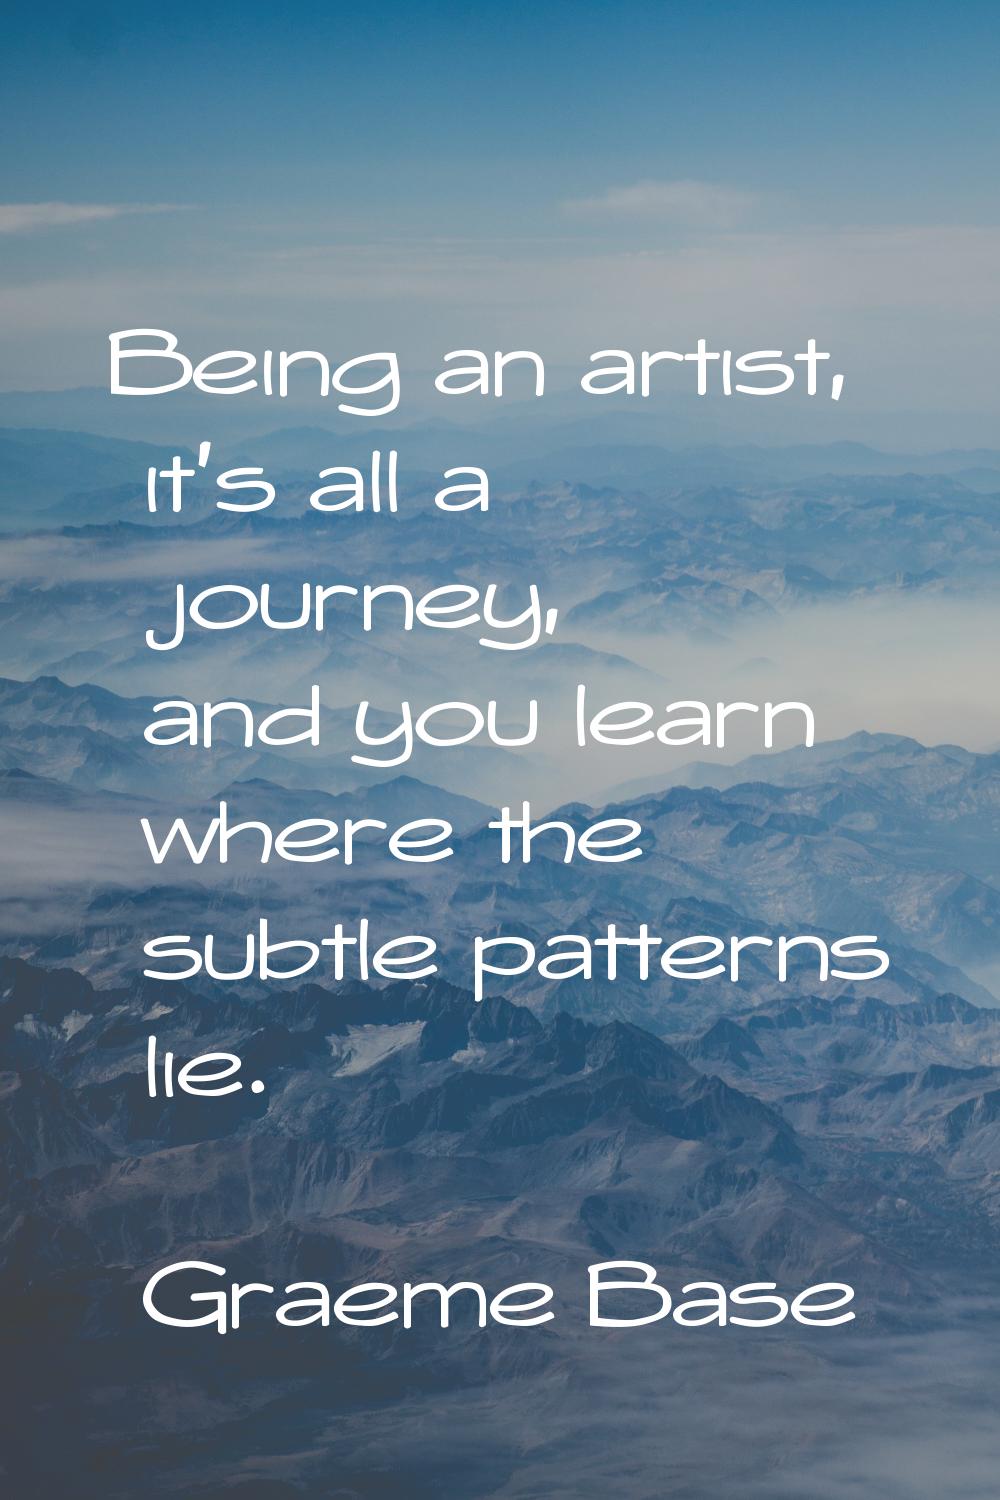 Being an artist, it's all a journey, and you learn where the subtle patterns lie.